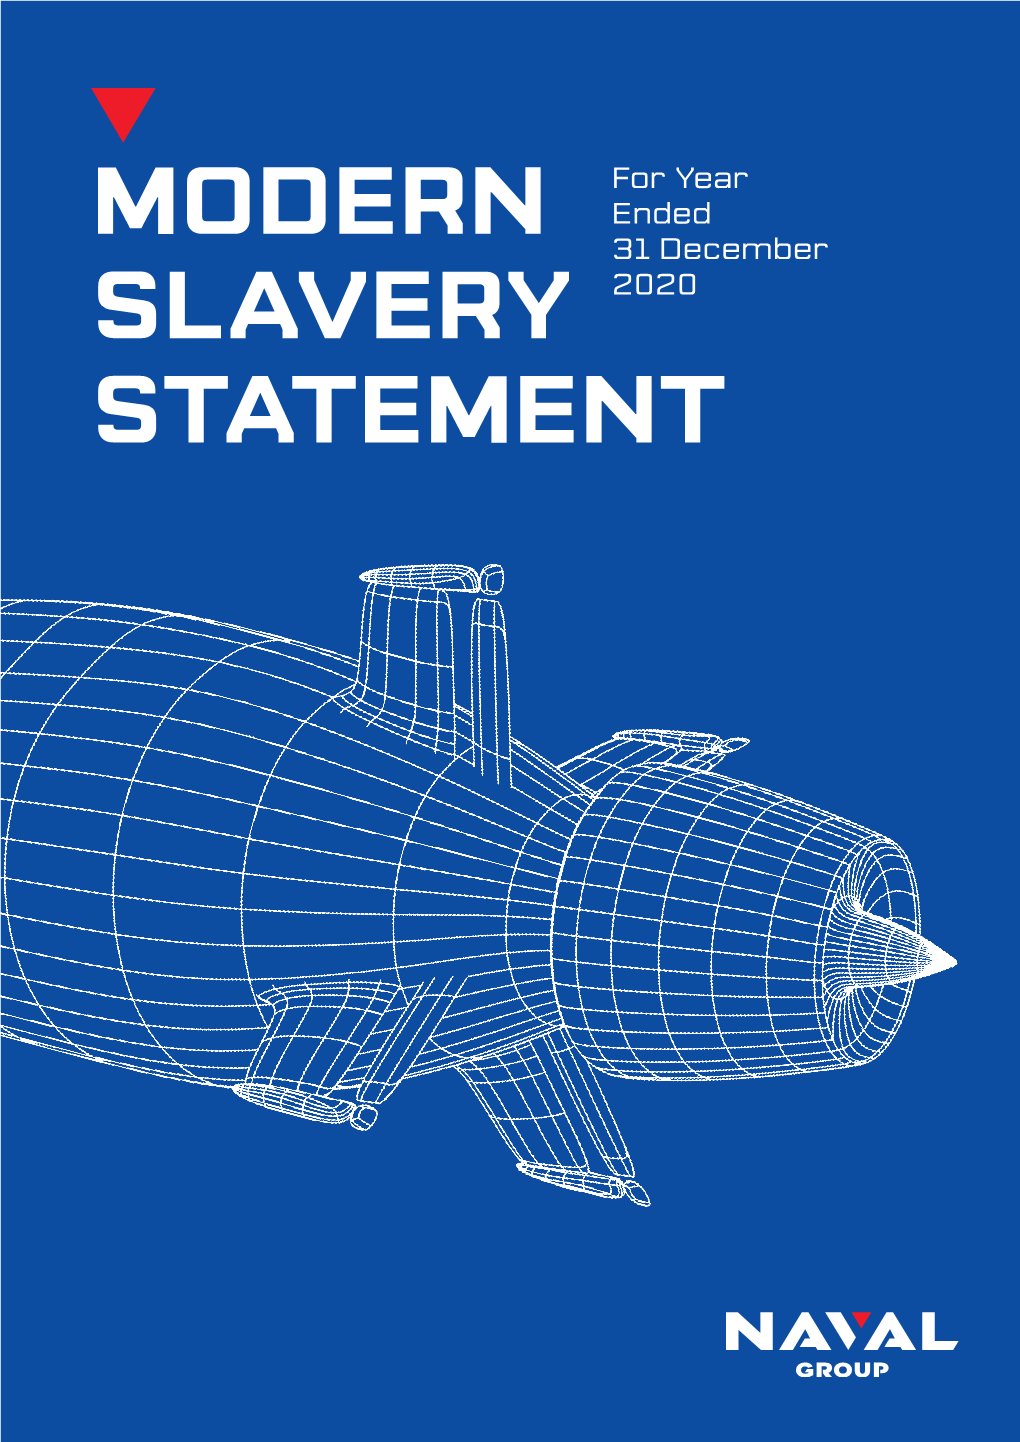 Modern Slavery Statement Is Made in Accordance with the Australian Modern Slavery Act 2018 (Cth) for the Year Ending 31 December 2020